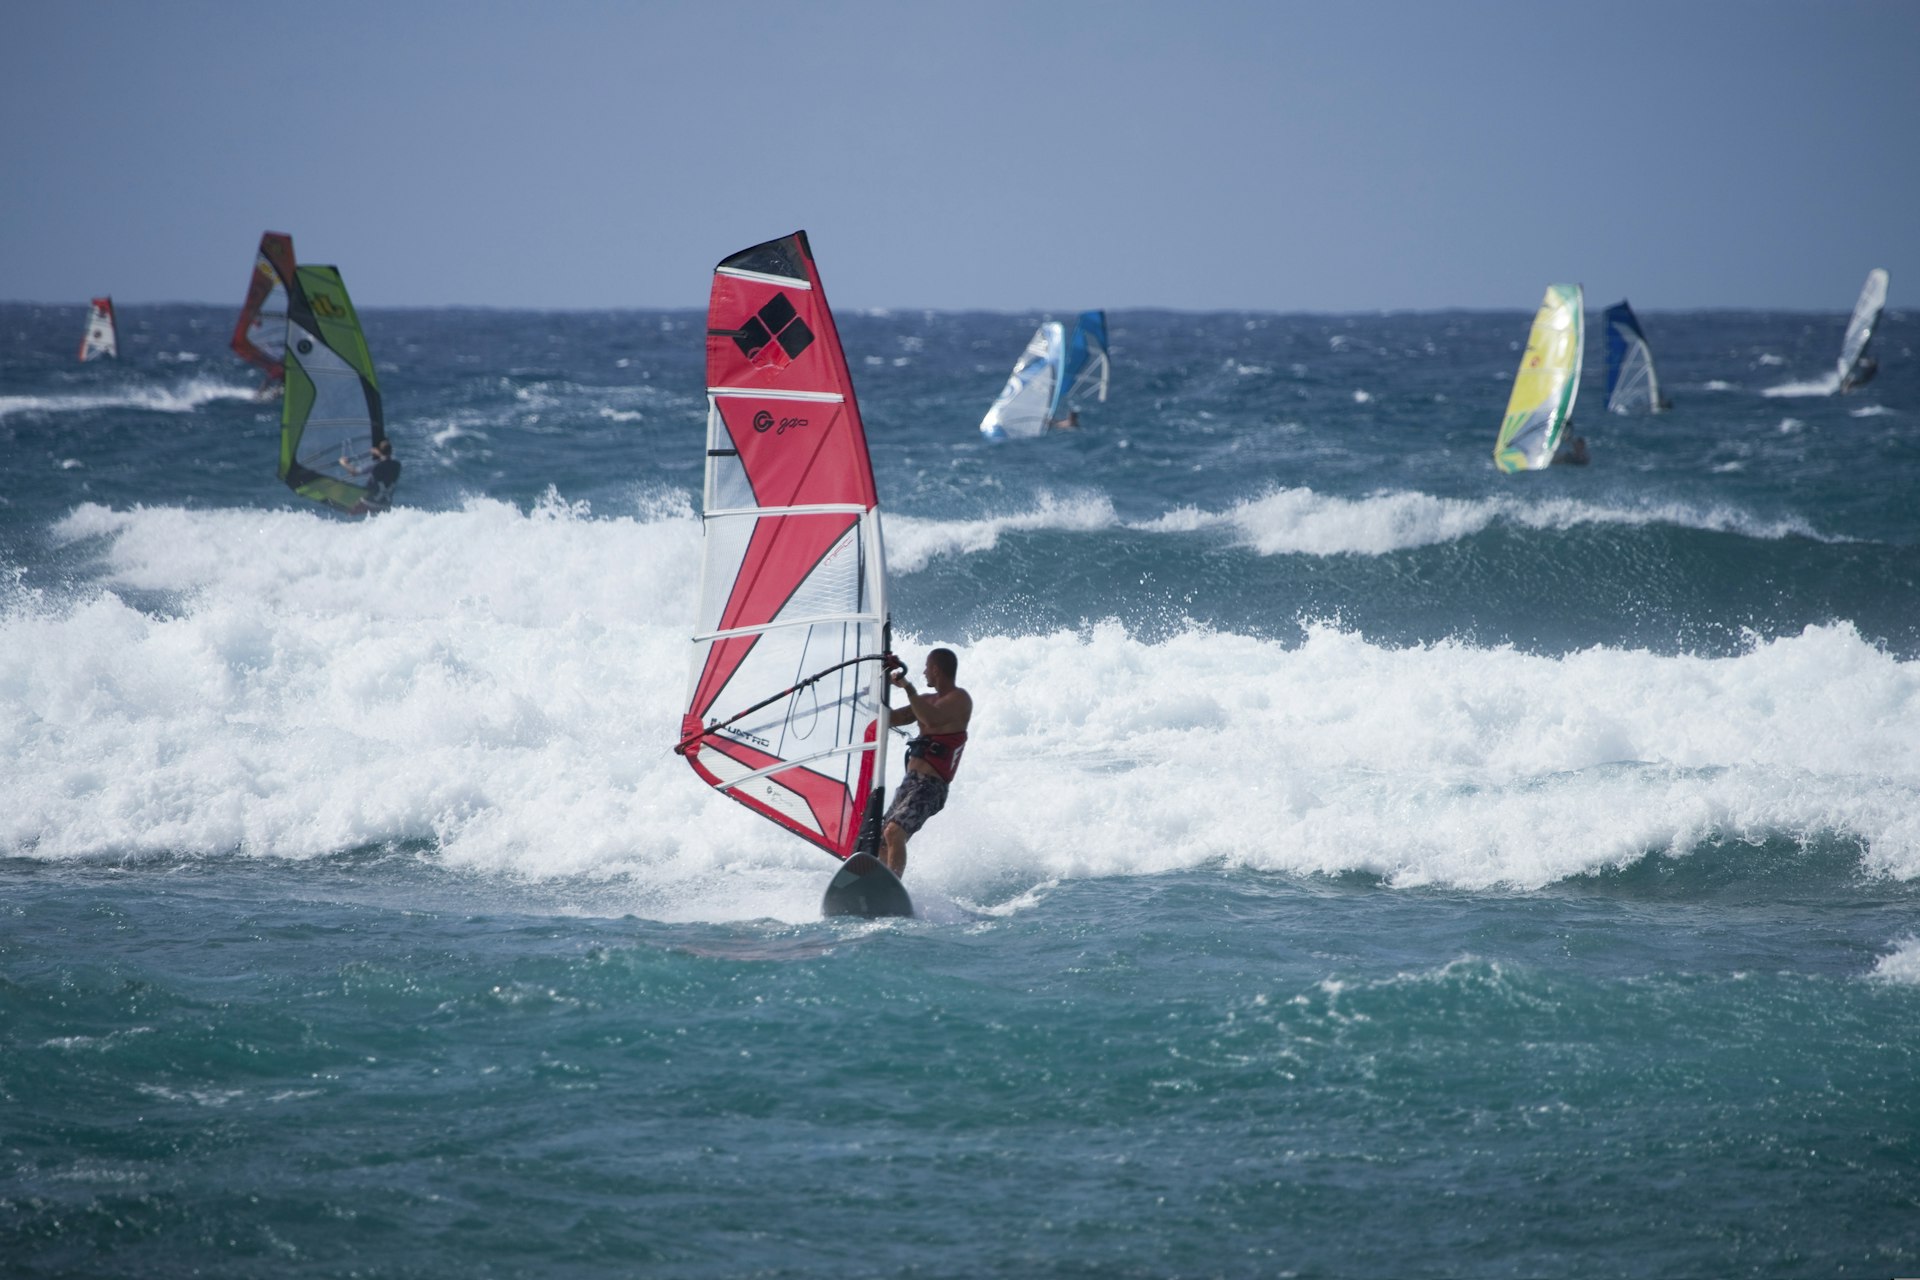 A windsurfer with a red sail attached to a board riding waves. Several other windsurfers are further out in the occean